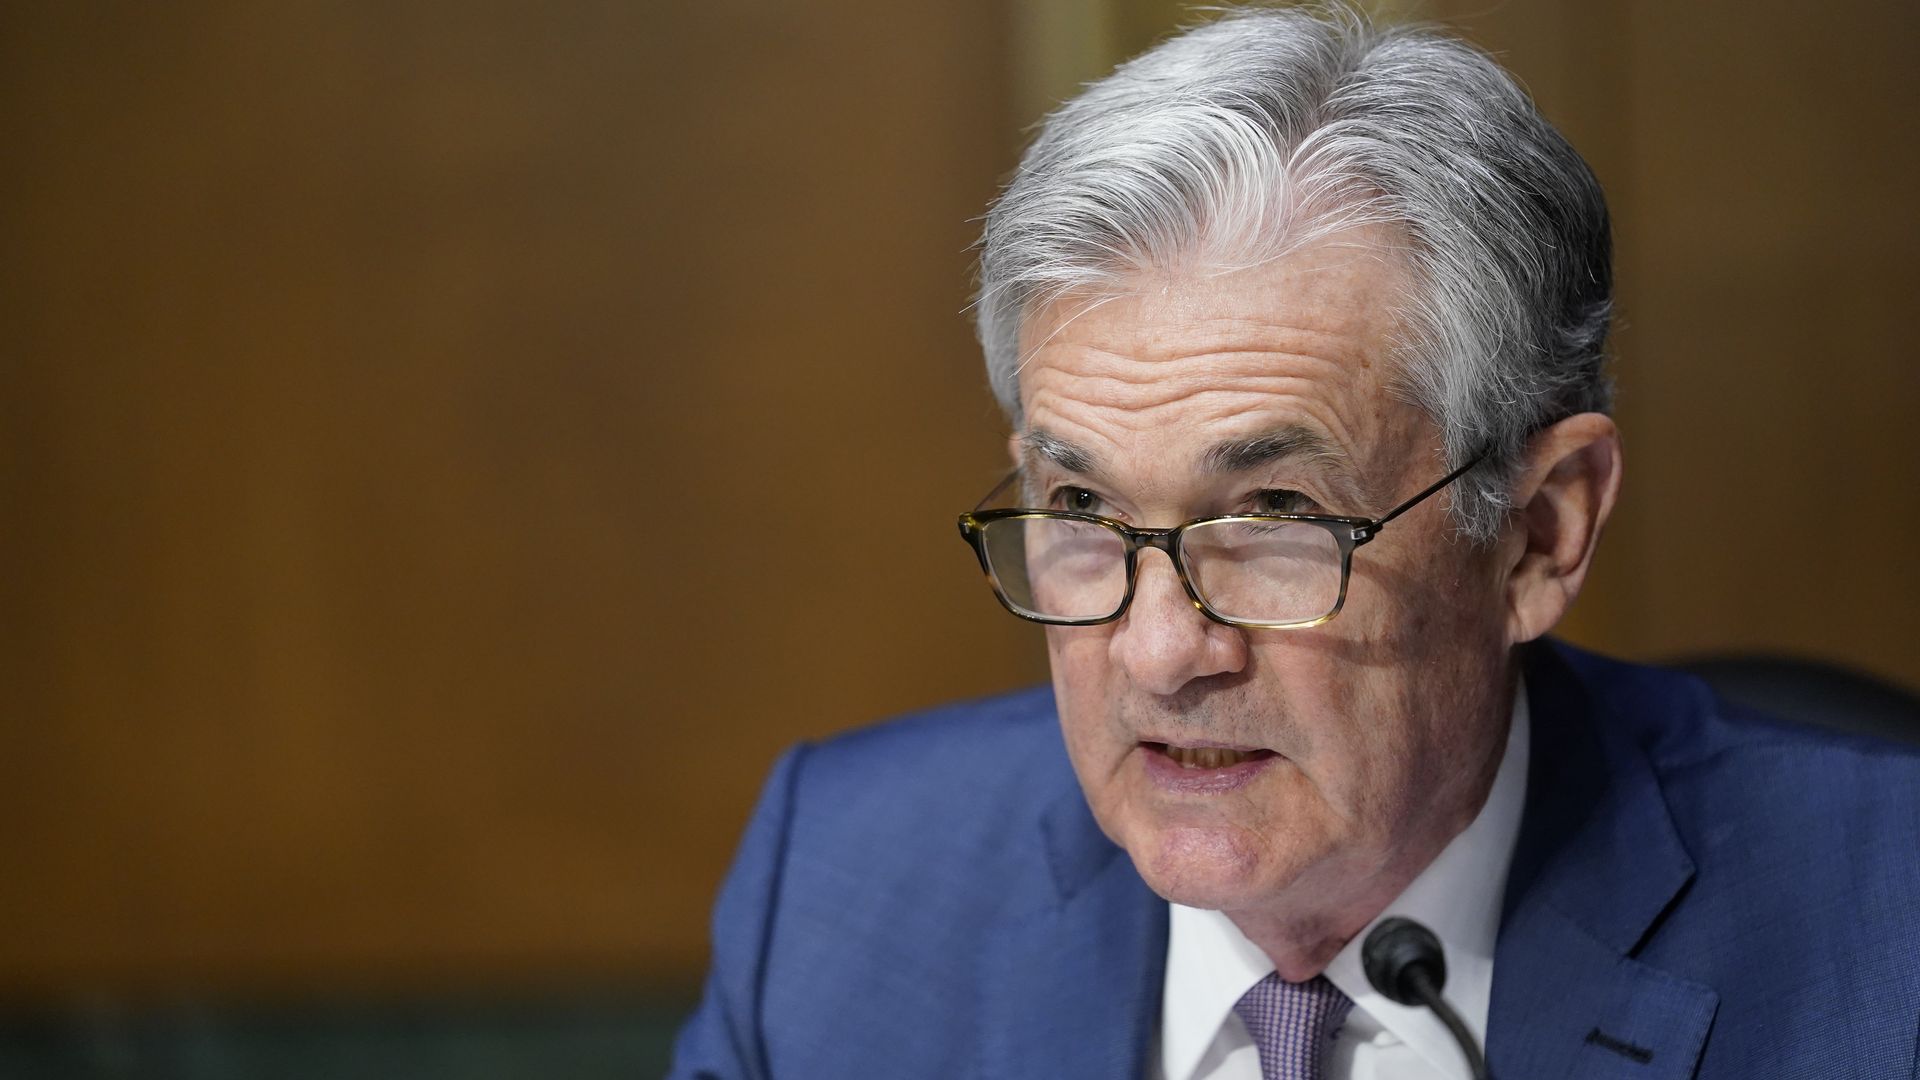 Federal Reserve Chairman Jerome Powell at a Senate Committee hearing